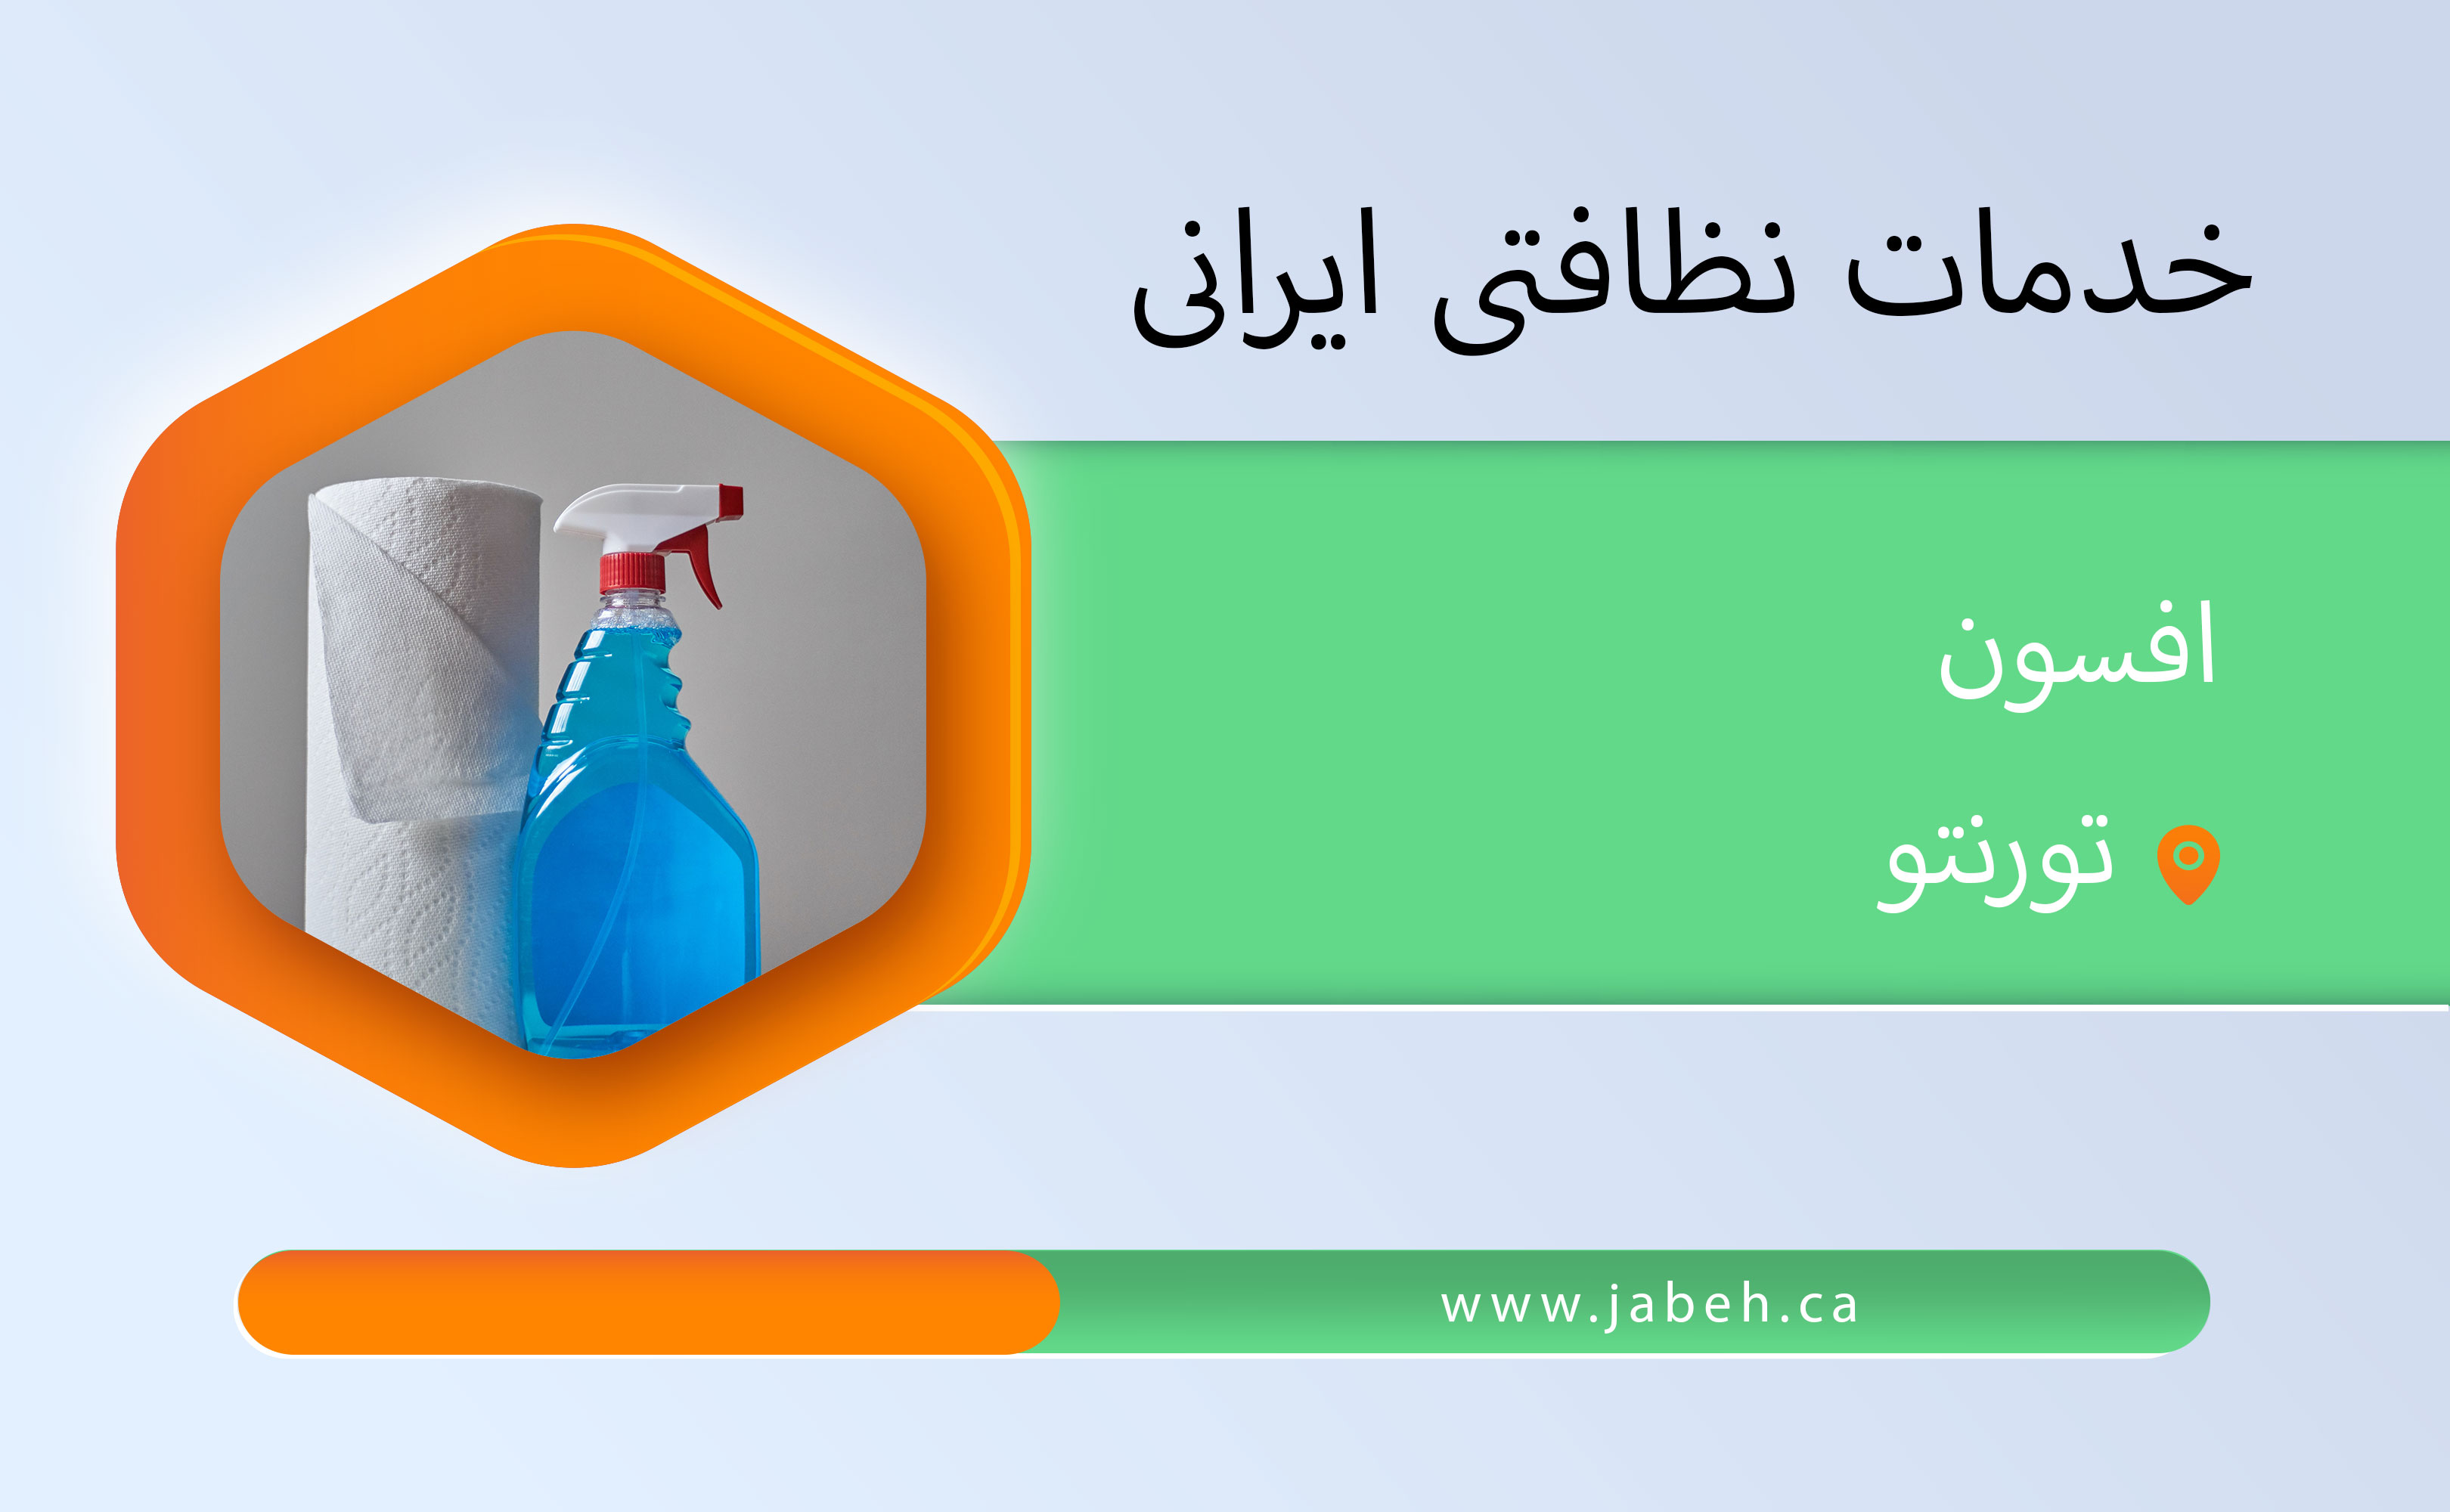 Iranian cleaning services of Afsun in Toronto